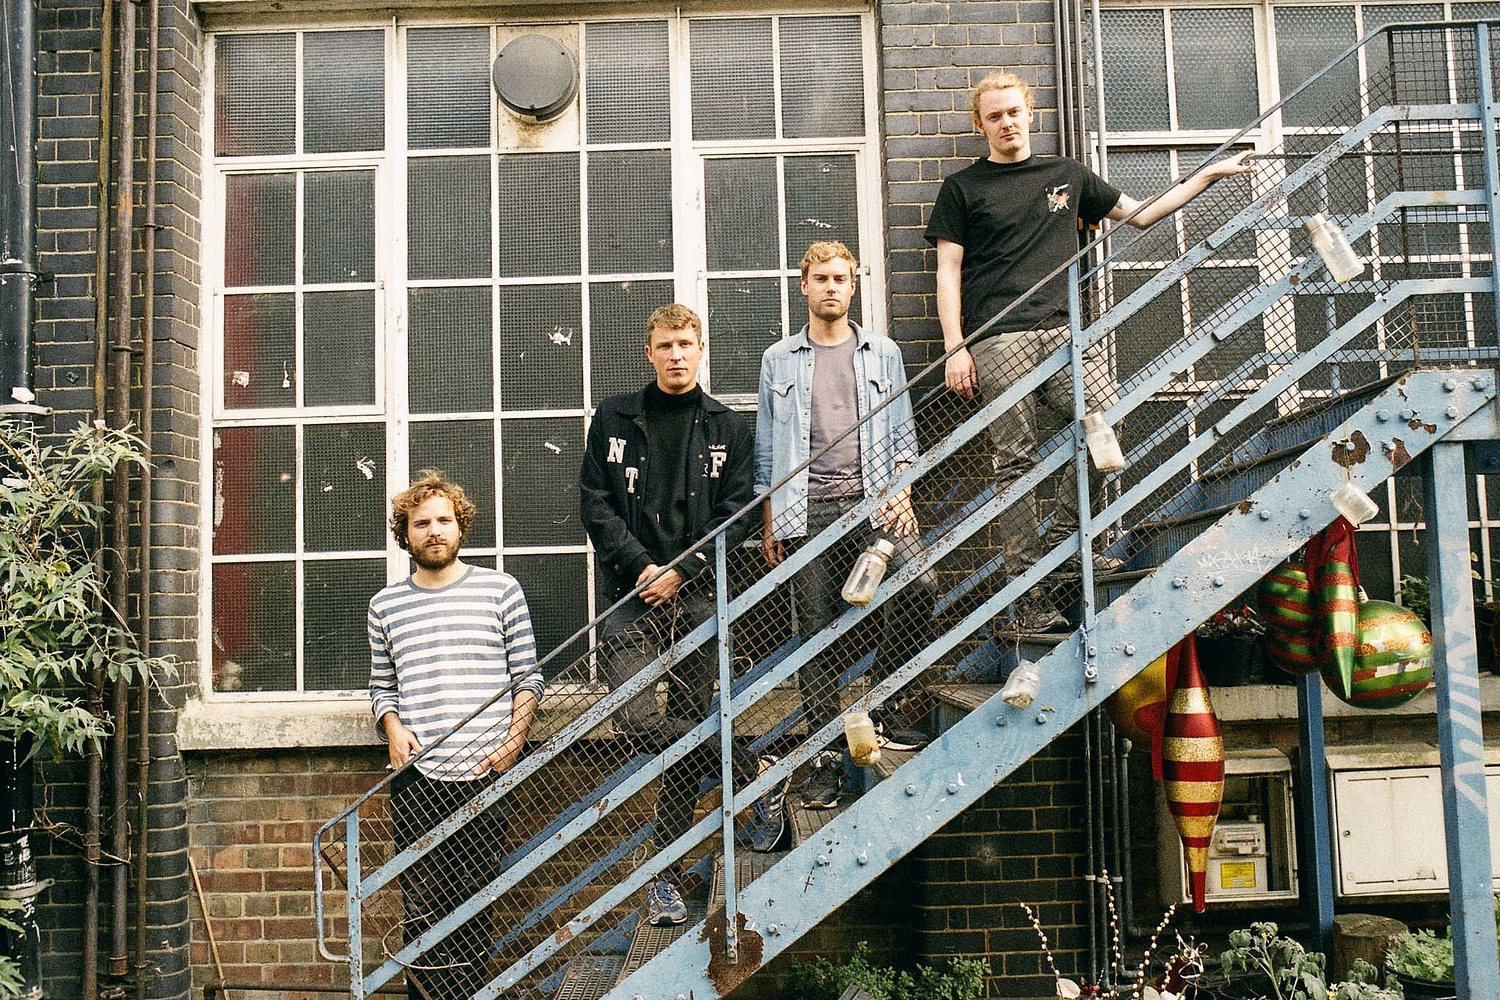 Palace "super psyched" to play Sound City 2015